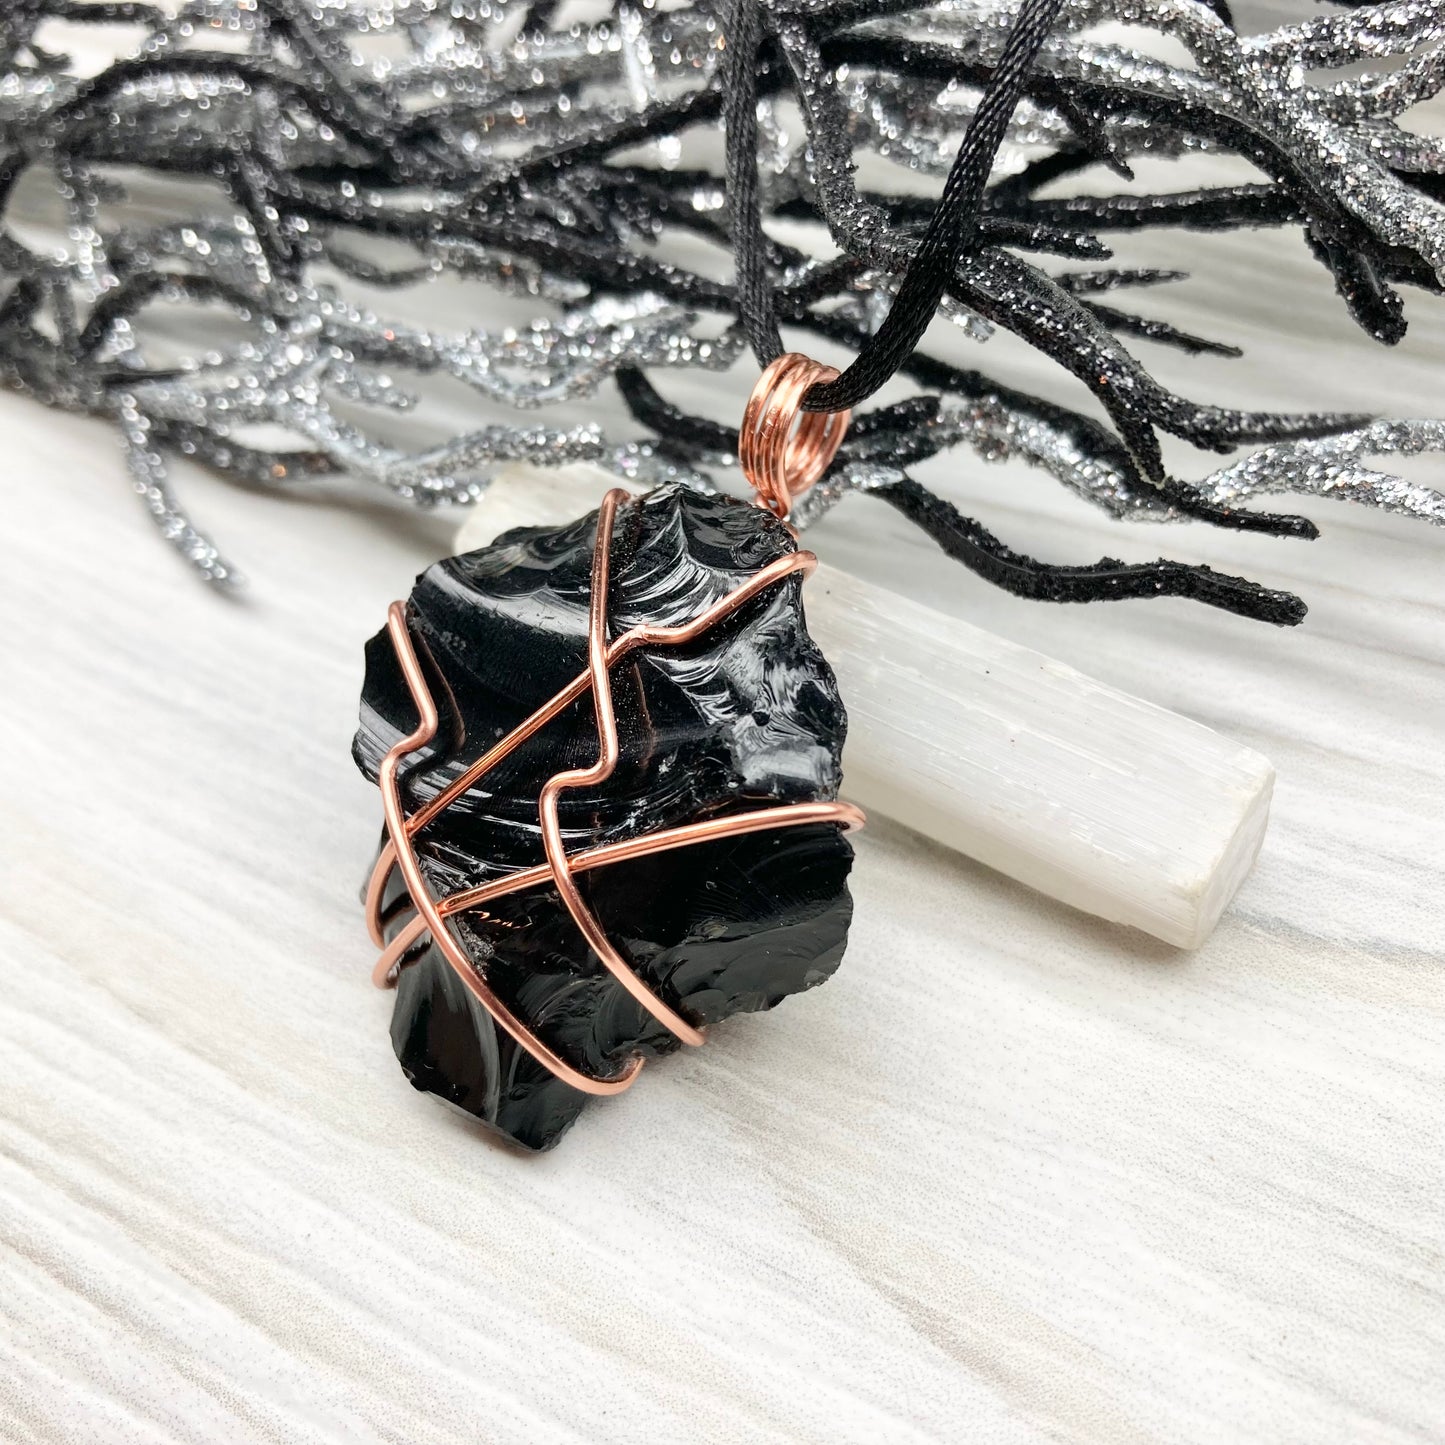 Raw Black Obsidian Necklace. Natural Obsidian Crystal Wrapped With Copper Wire. Comes On A Black Necklace. Witchy Pagan Style Jewelry.